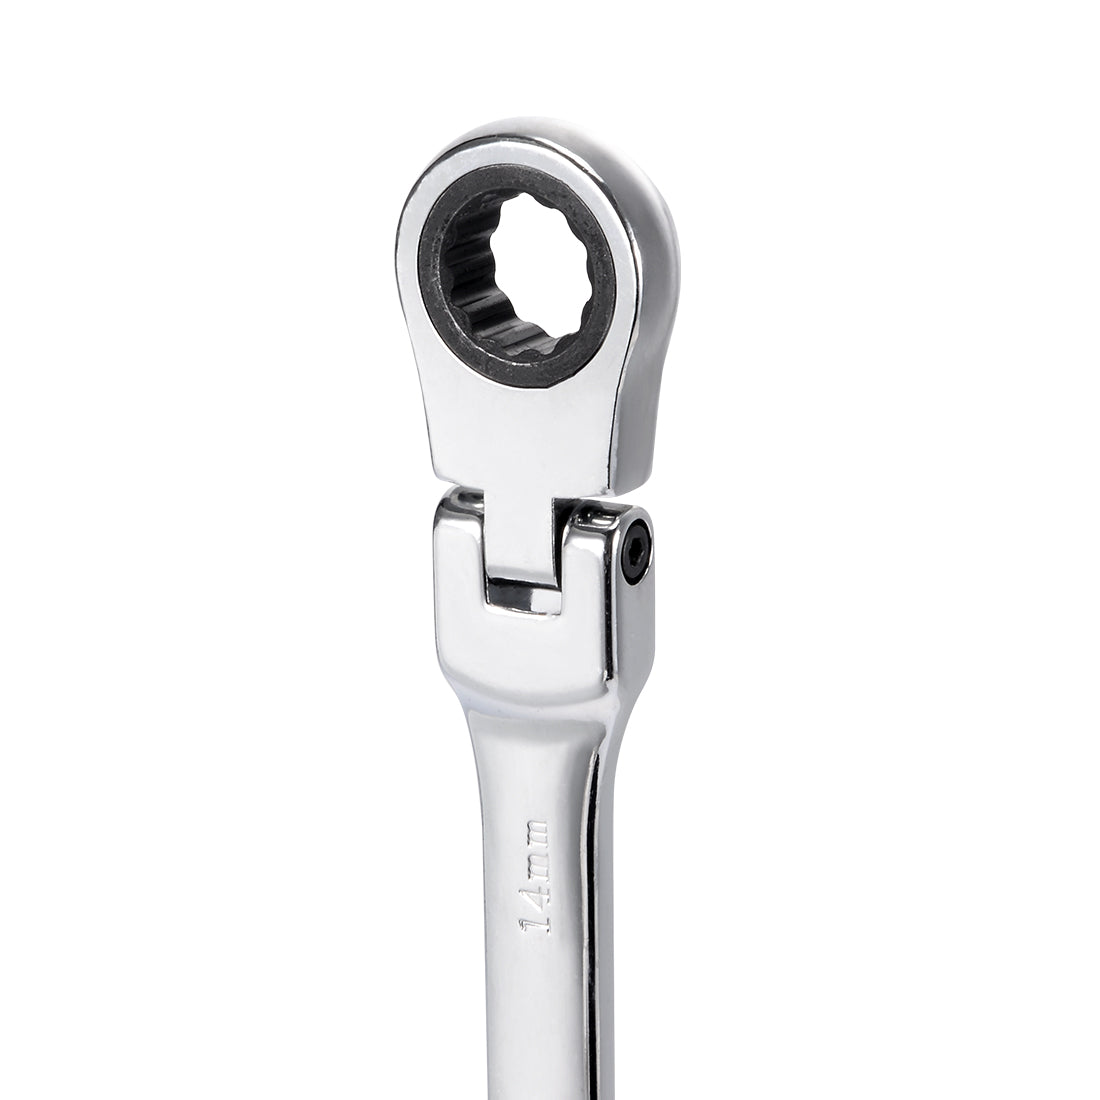 uxcell Uxcell Metric Box Open Ended Flex-Head Ratchet Combination Wrench Polish Chrome Finish, Cr-V